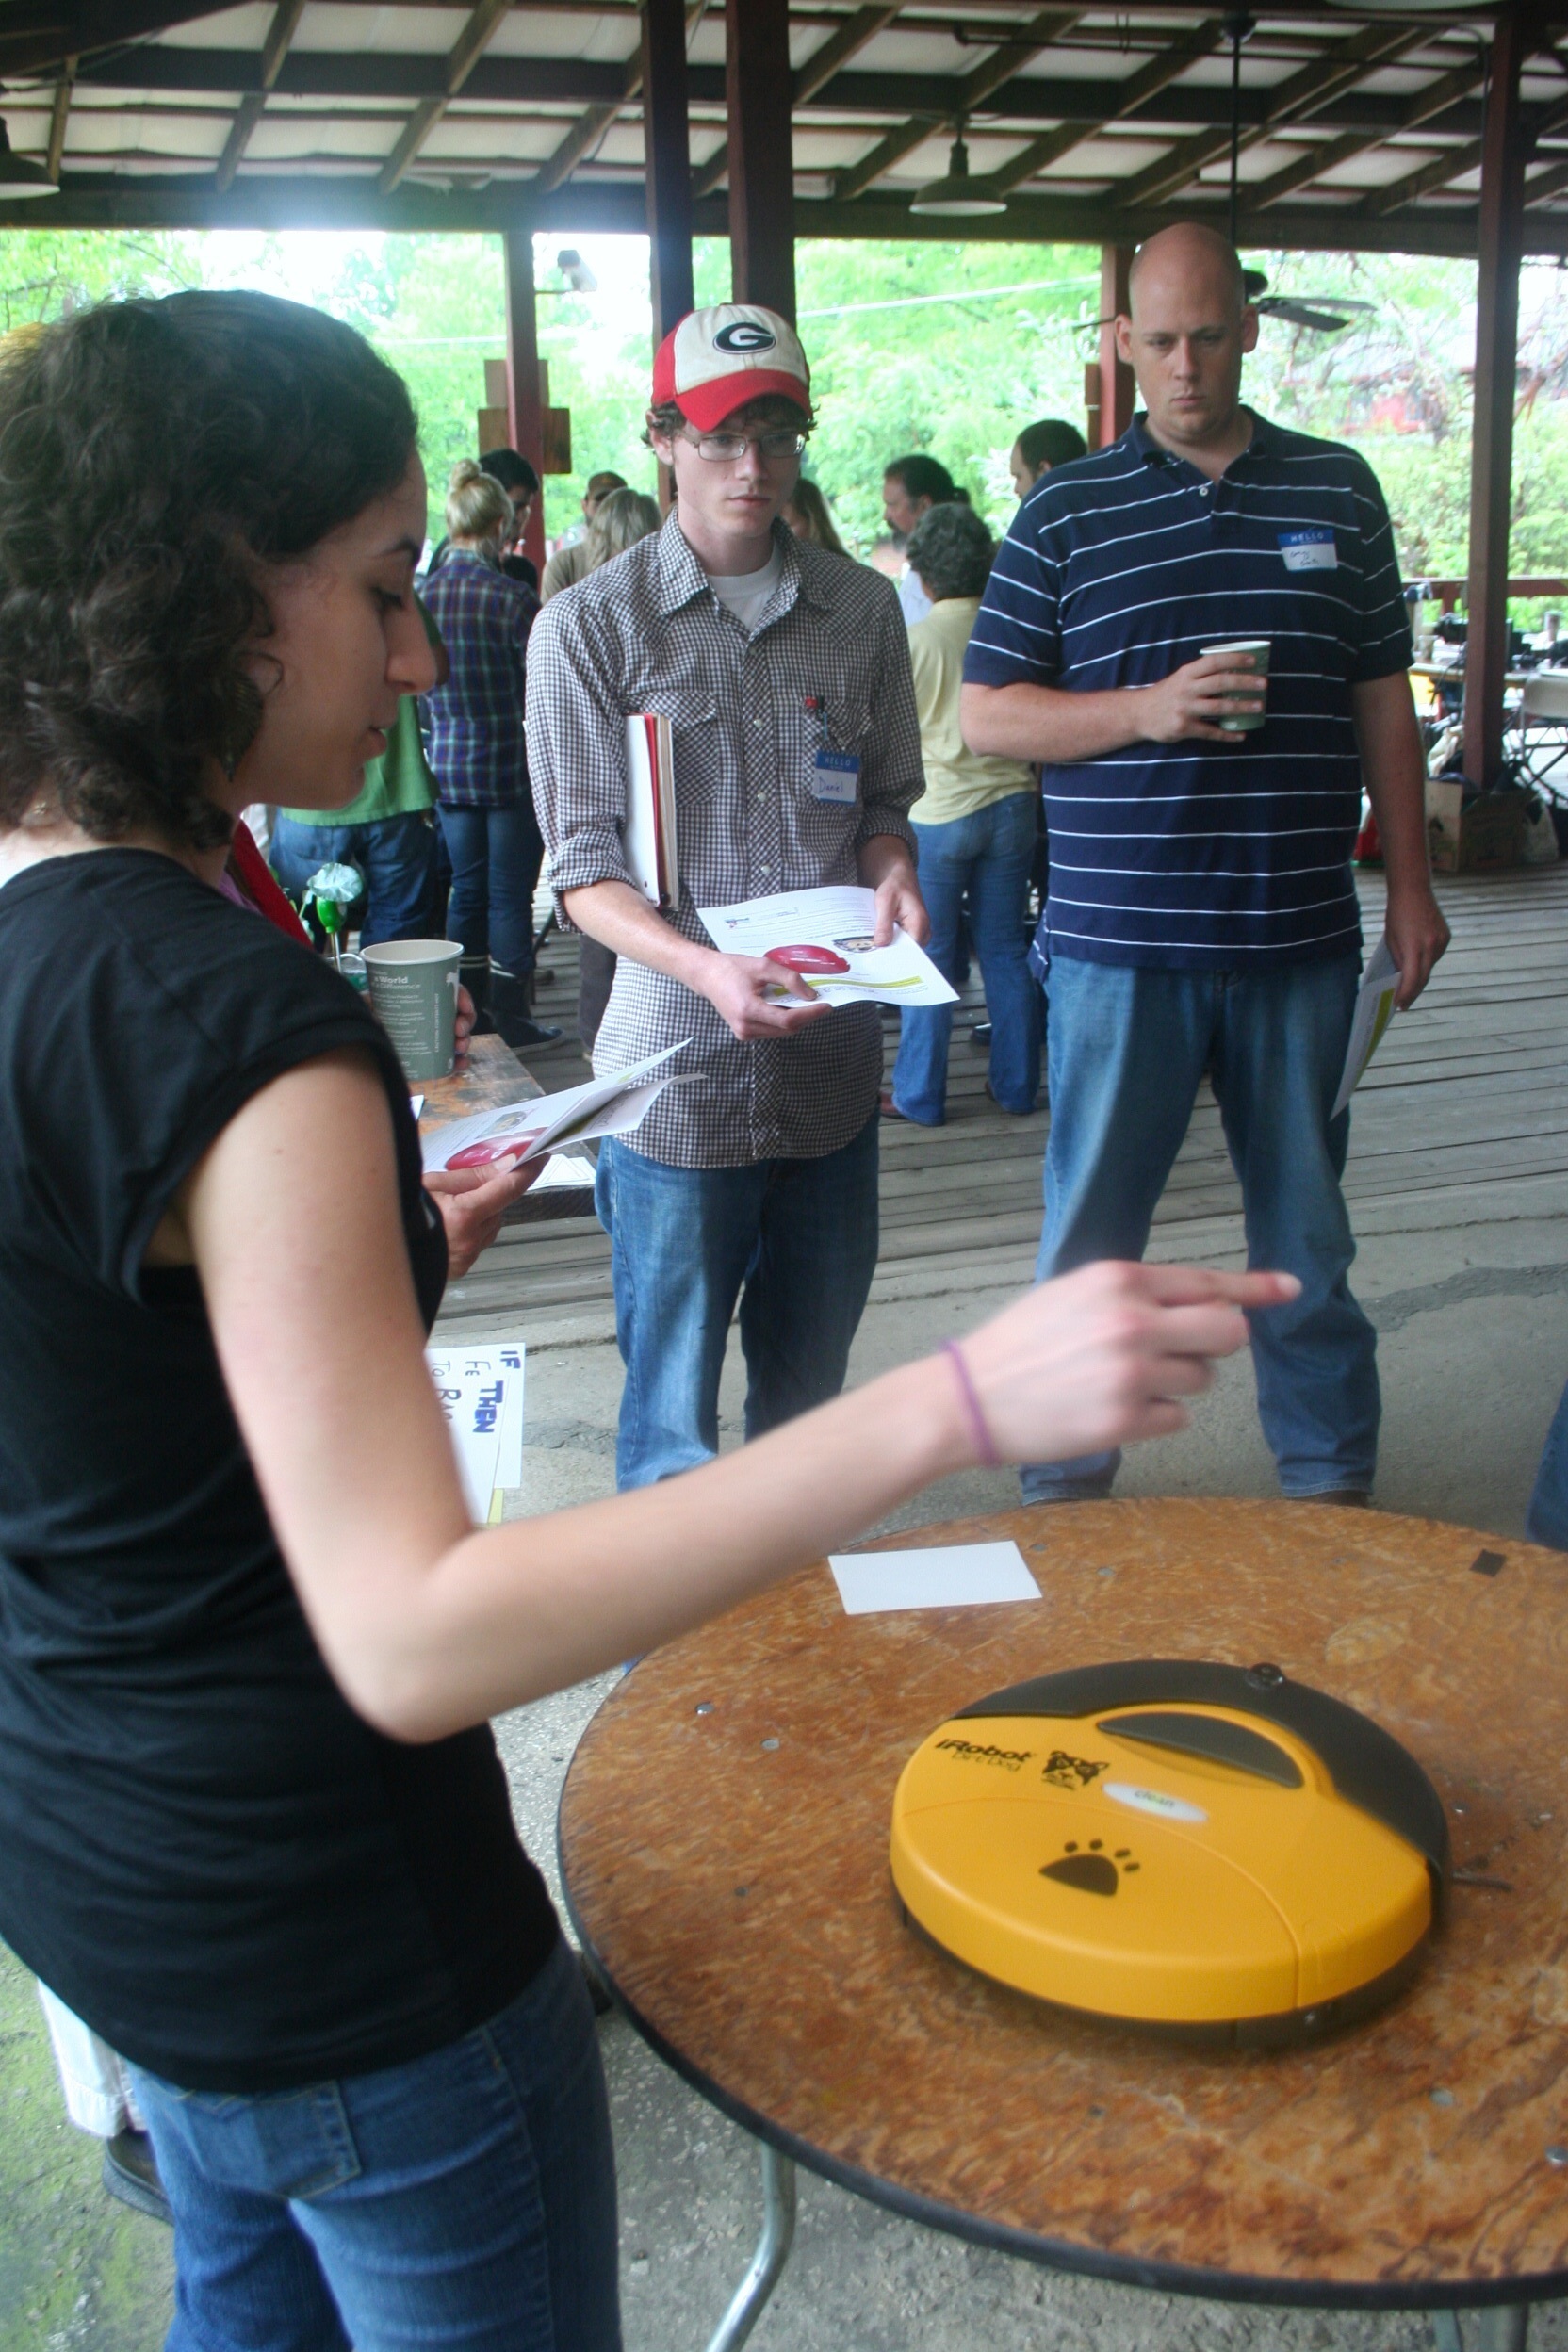 anna-mansour-demonstrates-the-roomba-to-participants_4577277756_o.jpg